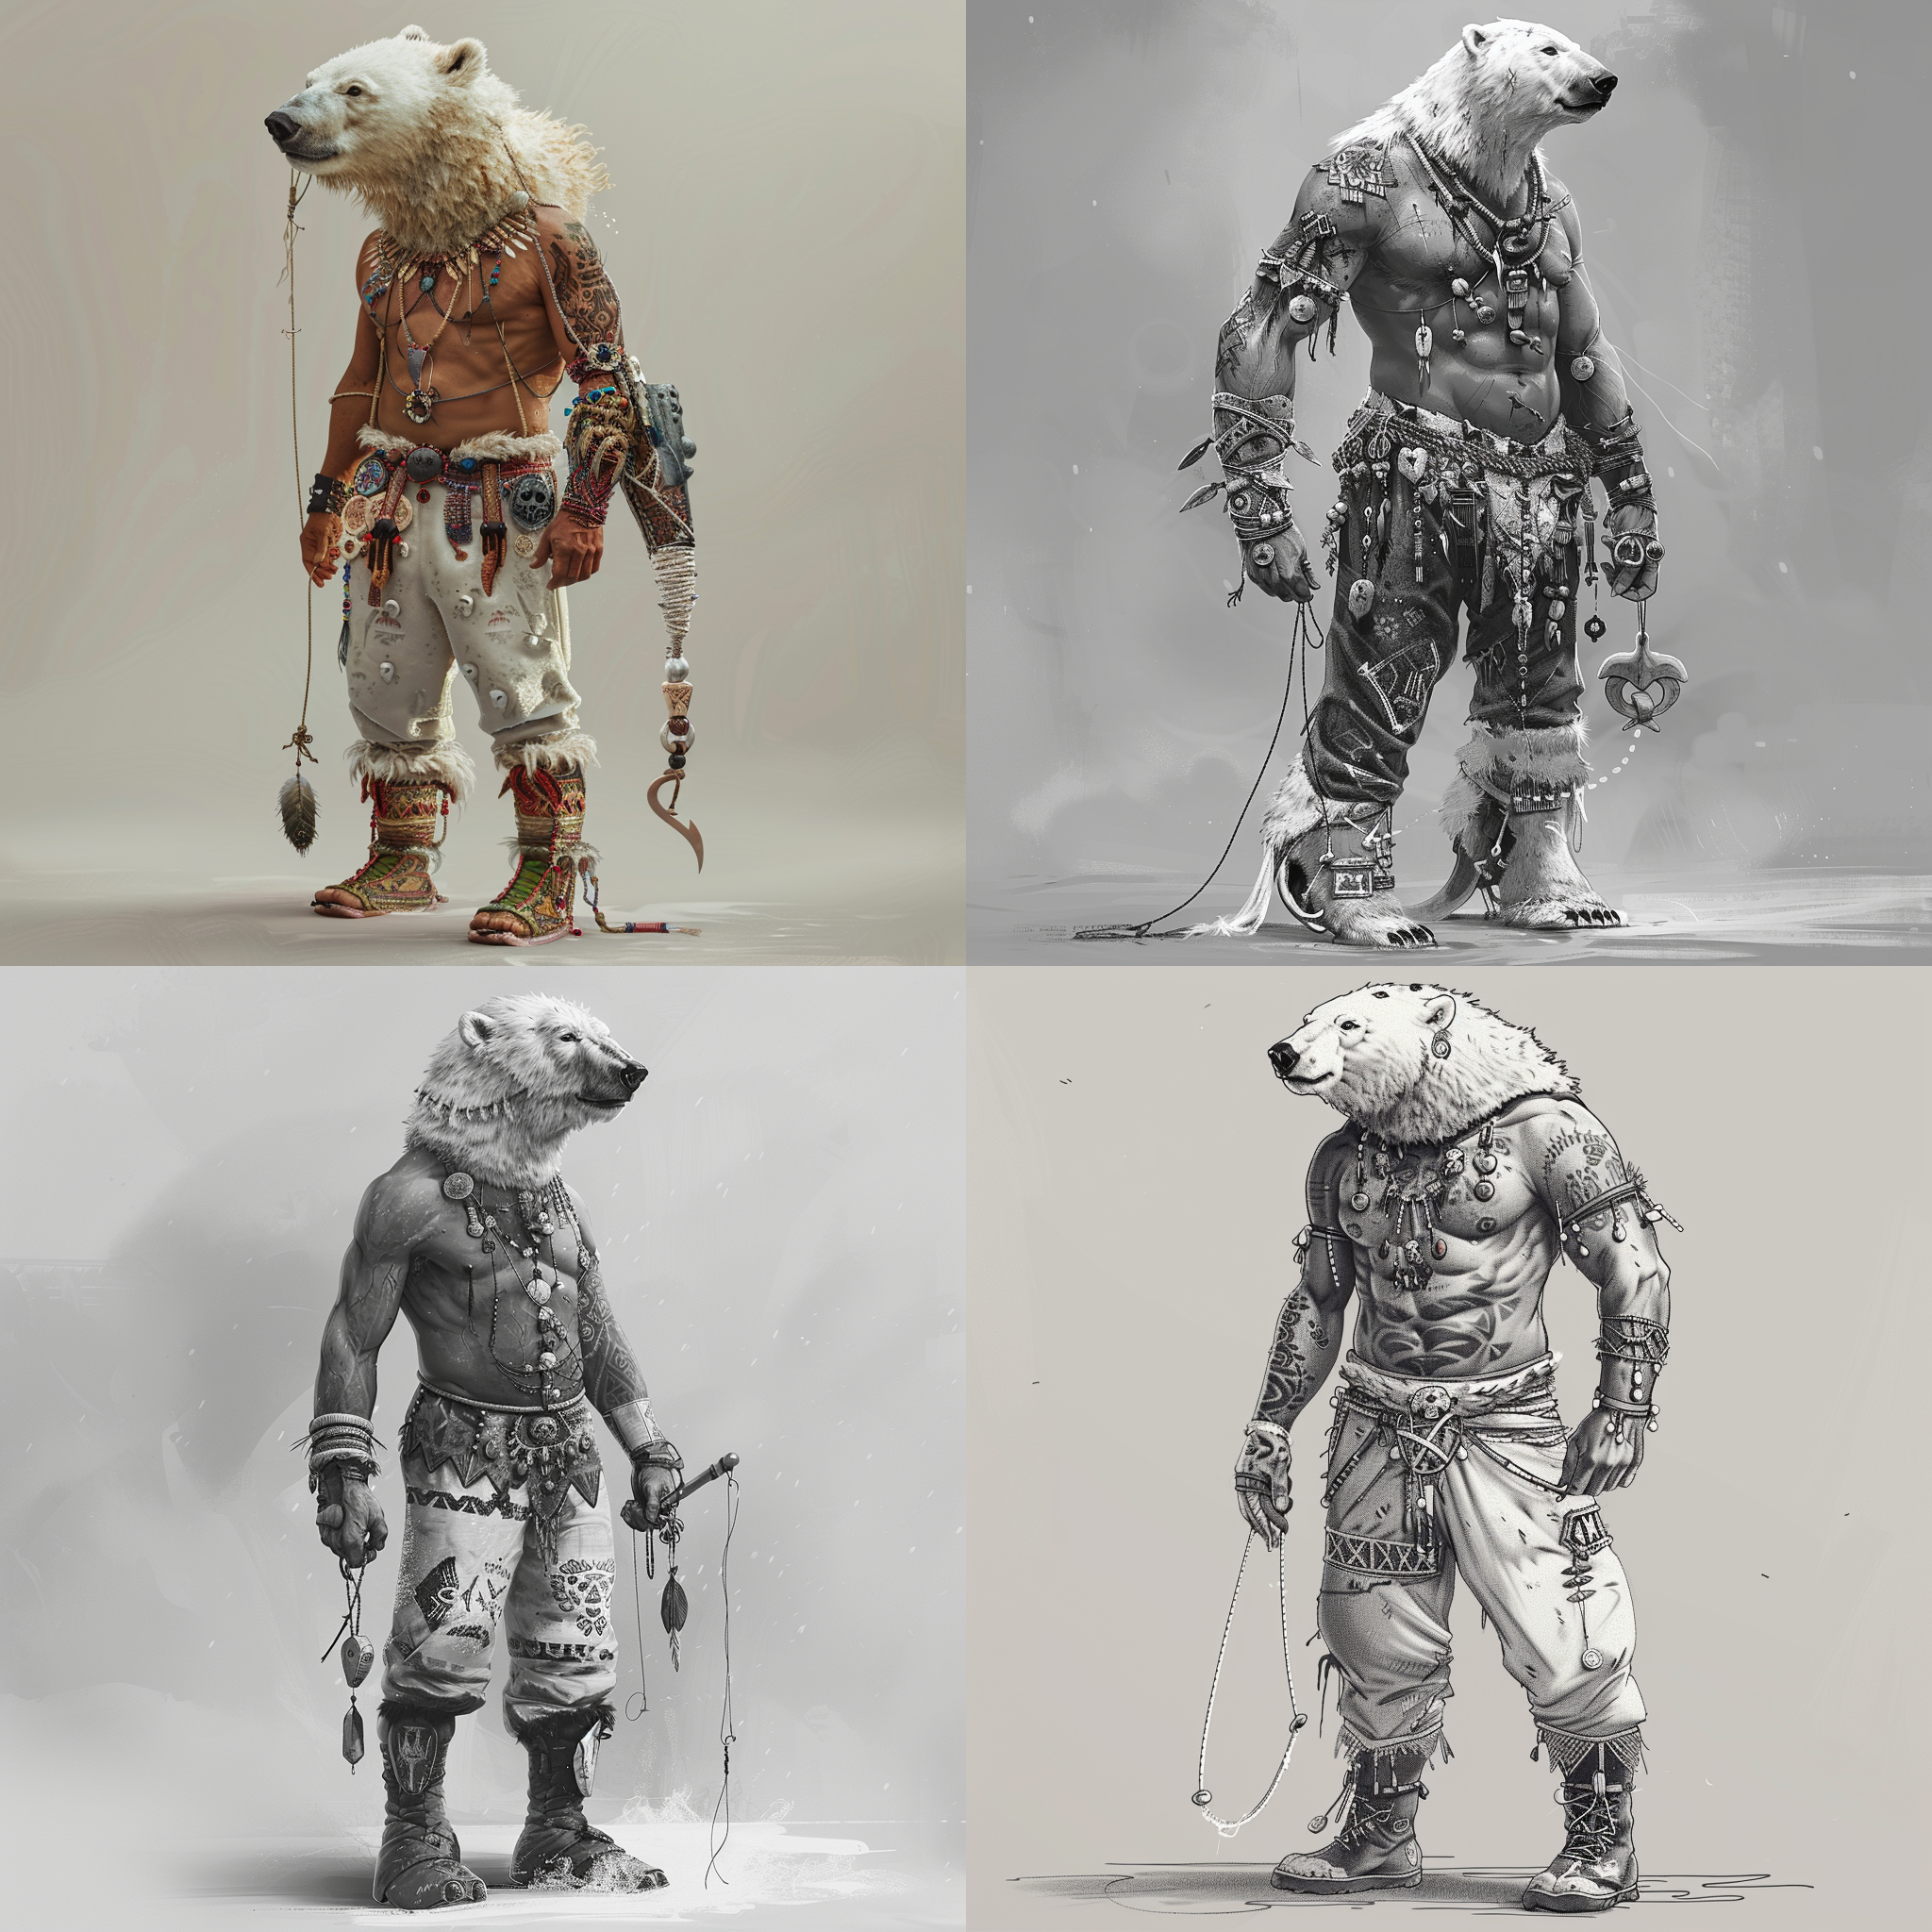 I need to generate a older demigod. He is a one-armed man with the head of a polar bear. He is an amputee missing his right arm. He wears traditional Inuit pants and boots with lots of traditional details and charms, with a shaman aesthetic. He carries a string with a hand-carved fish-hook on it. There is confidence in his posture and an unsettling nature about him.